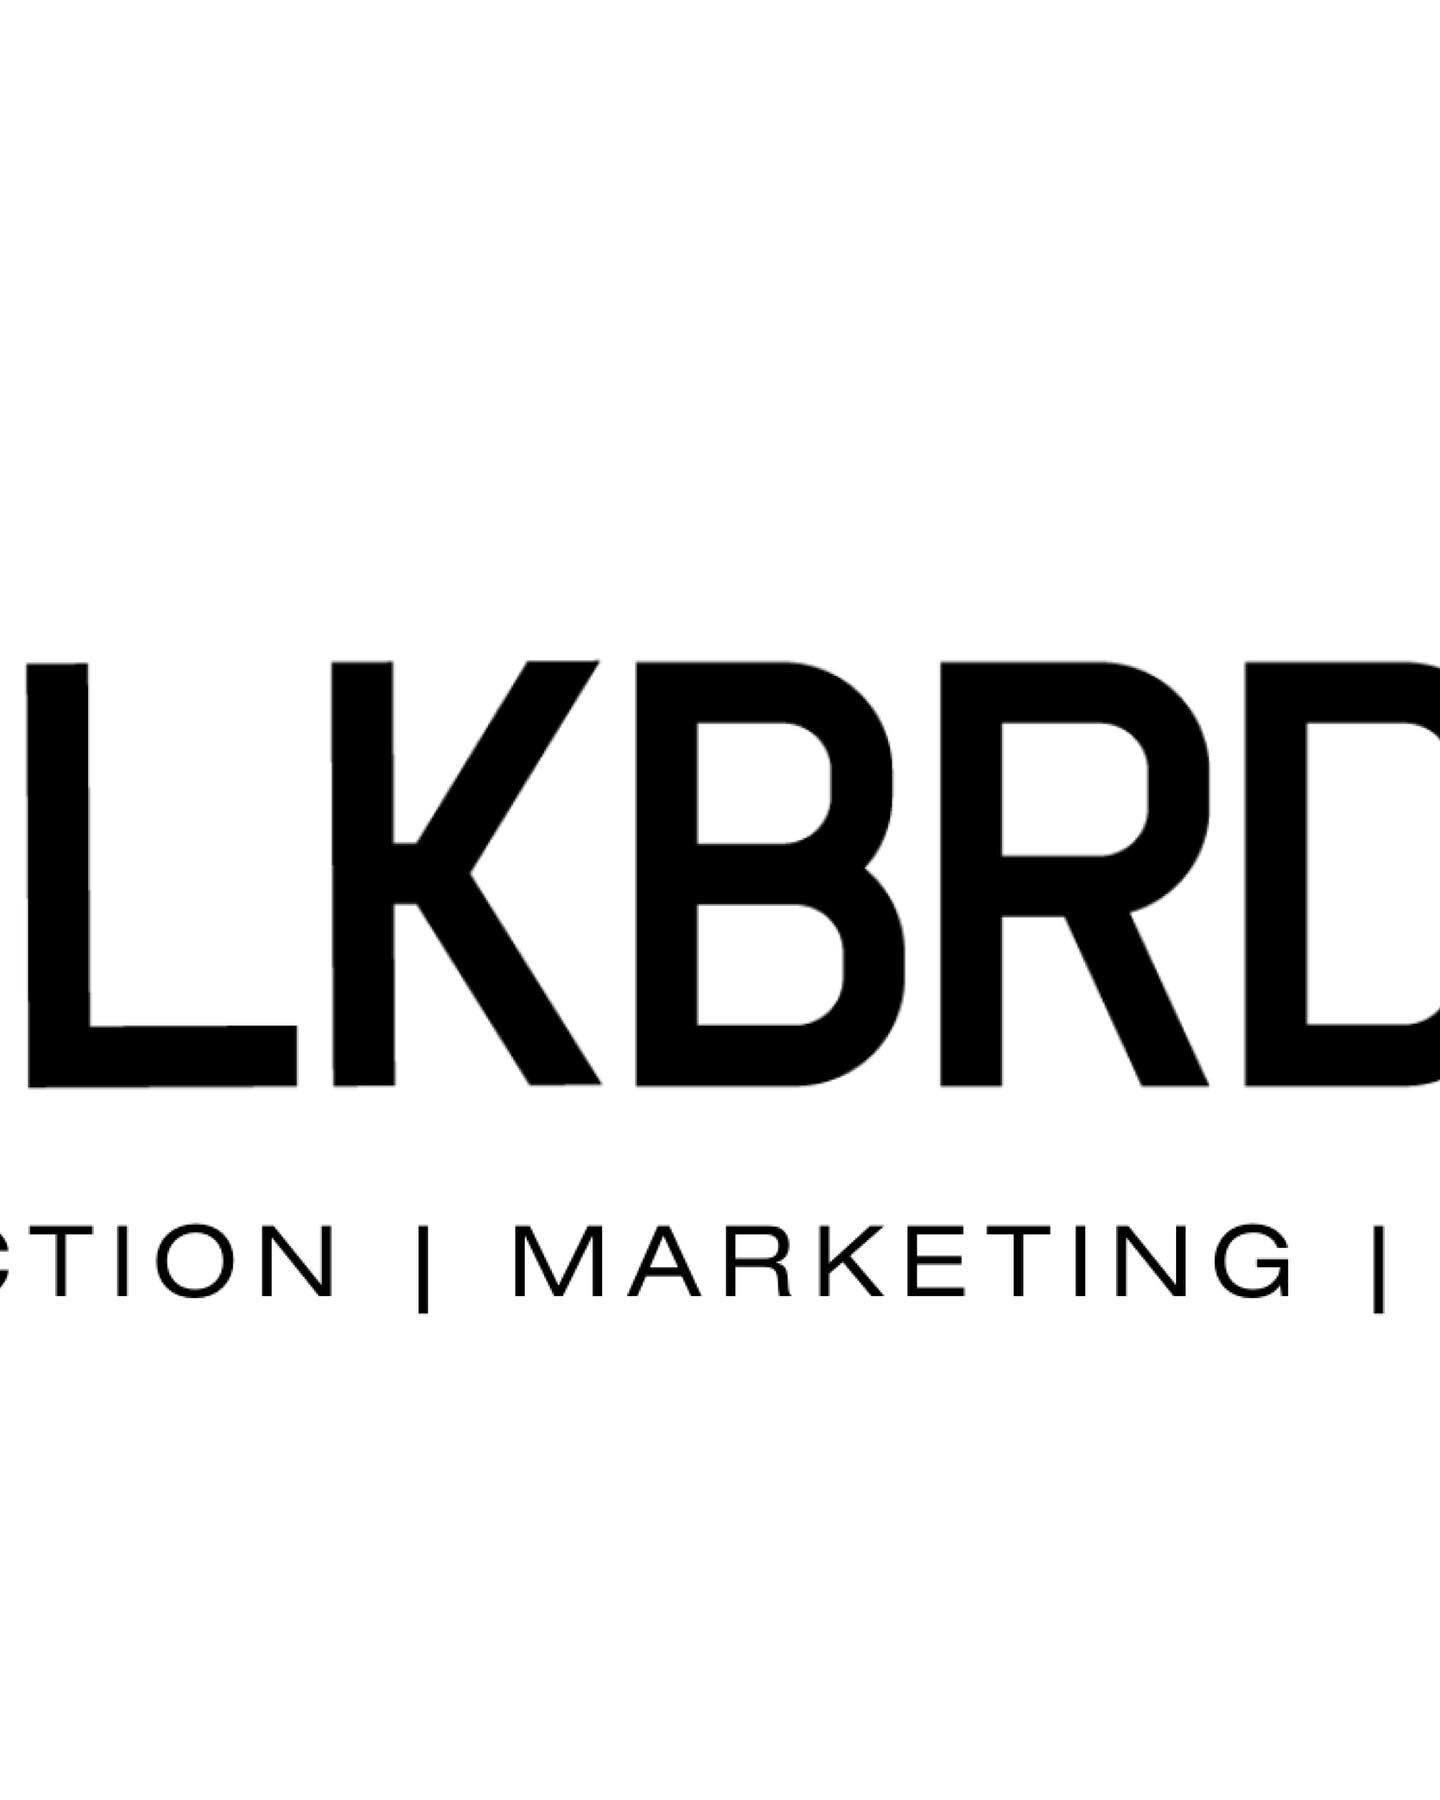 Introducing BLKBRD CO. Americas Creative Agency specializing high quality end to end marketing. Veteran owned and operated.

#blkbrdco #blkbrd #sr71 #marketing #agency #branding #rebrand #launch